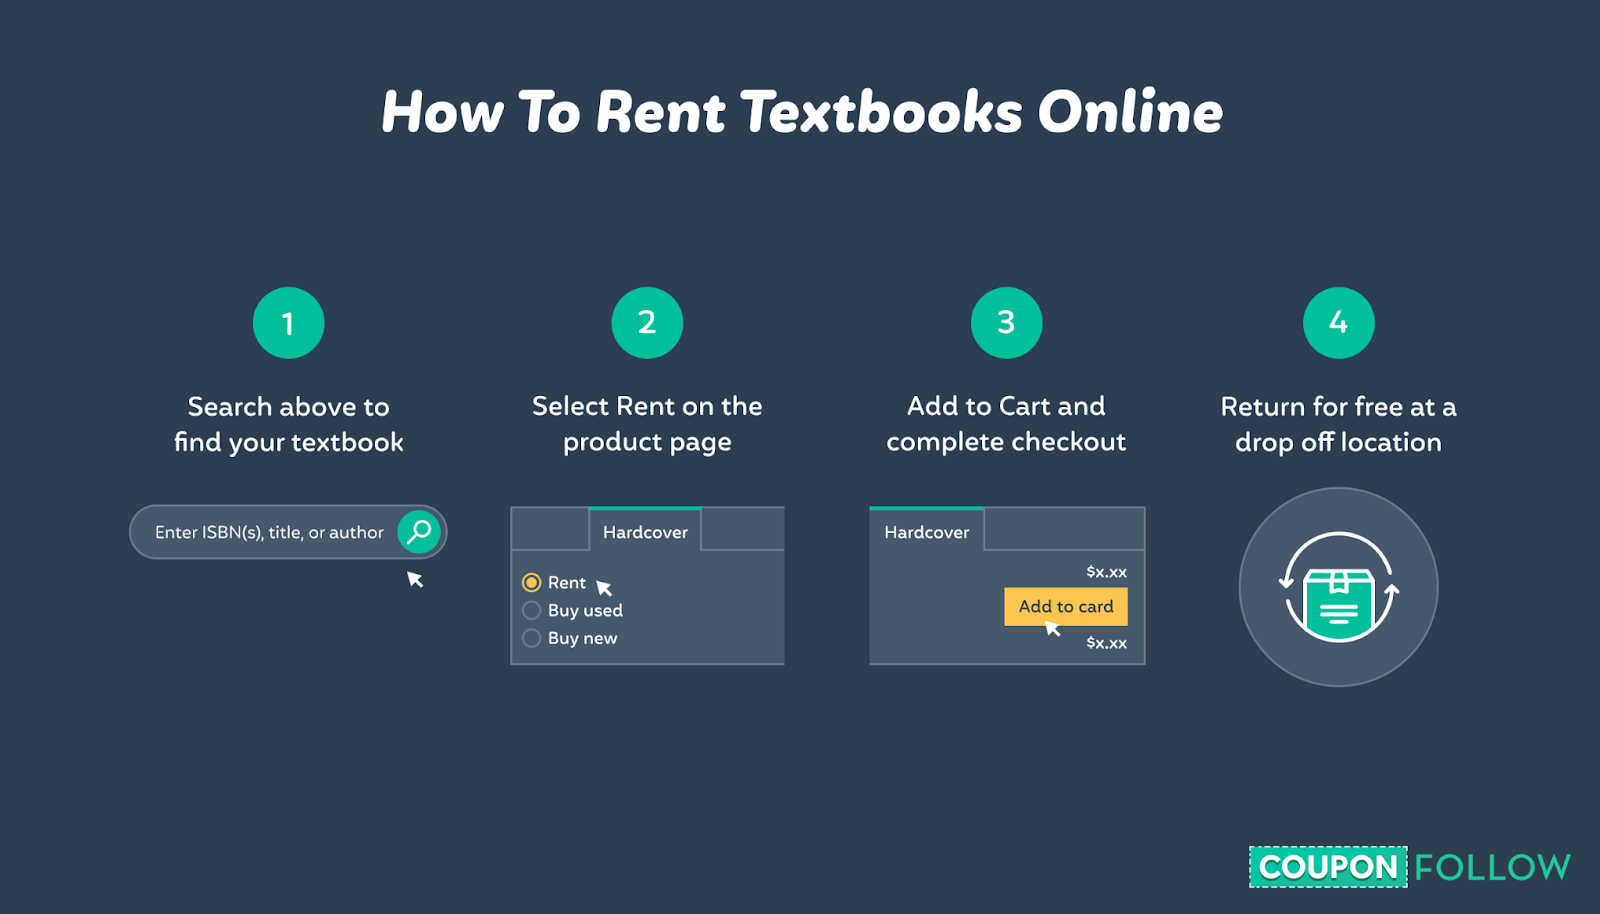 Illustrated infographic showing steps to rent textbooks online